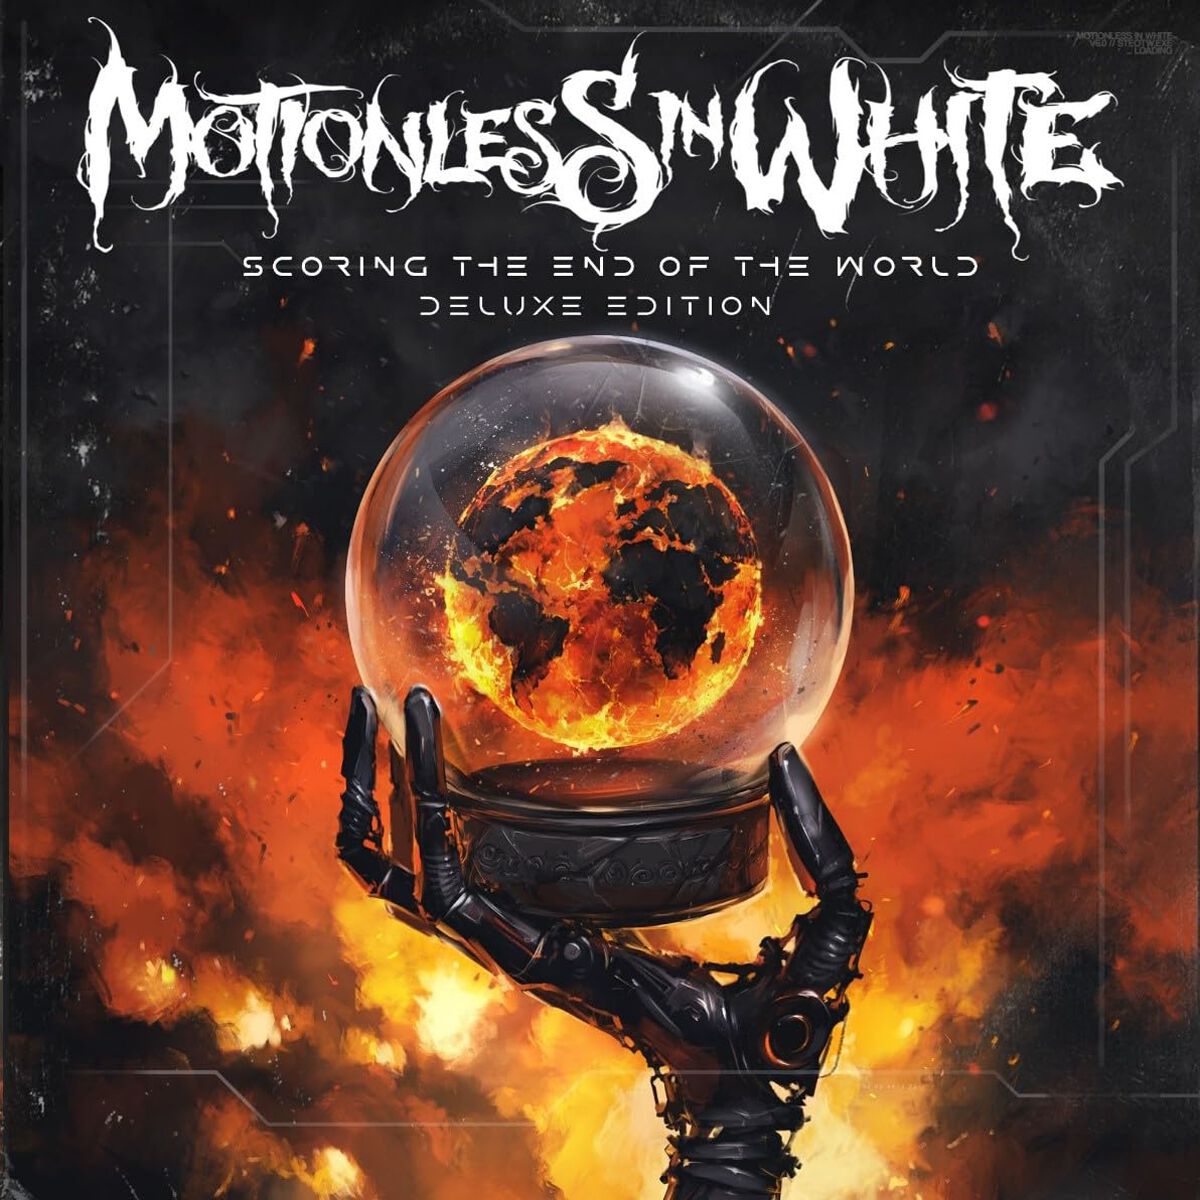 Motionless In White Scoring the end of the world (Deluxe Edition) CD multicolor